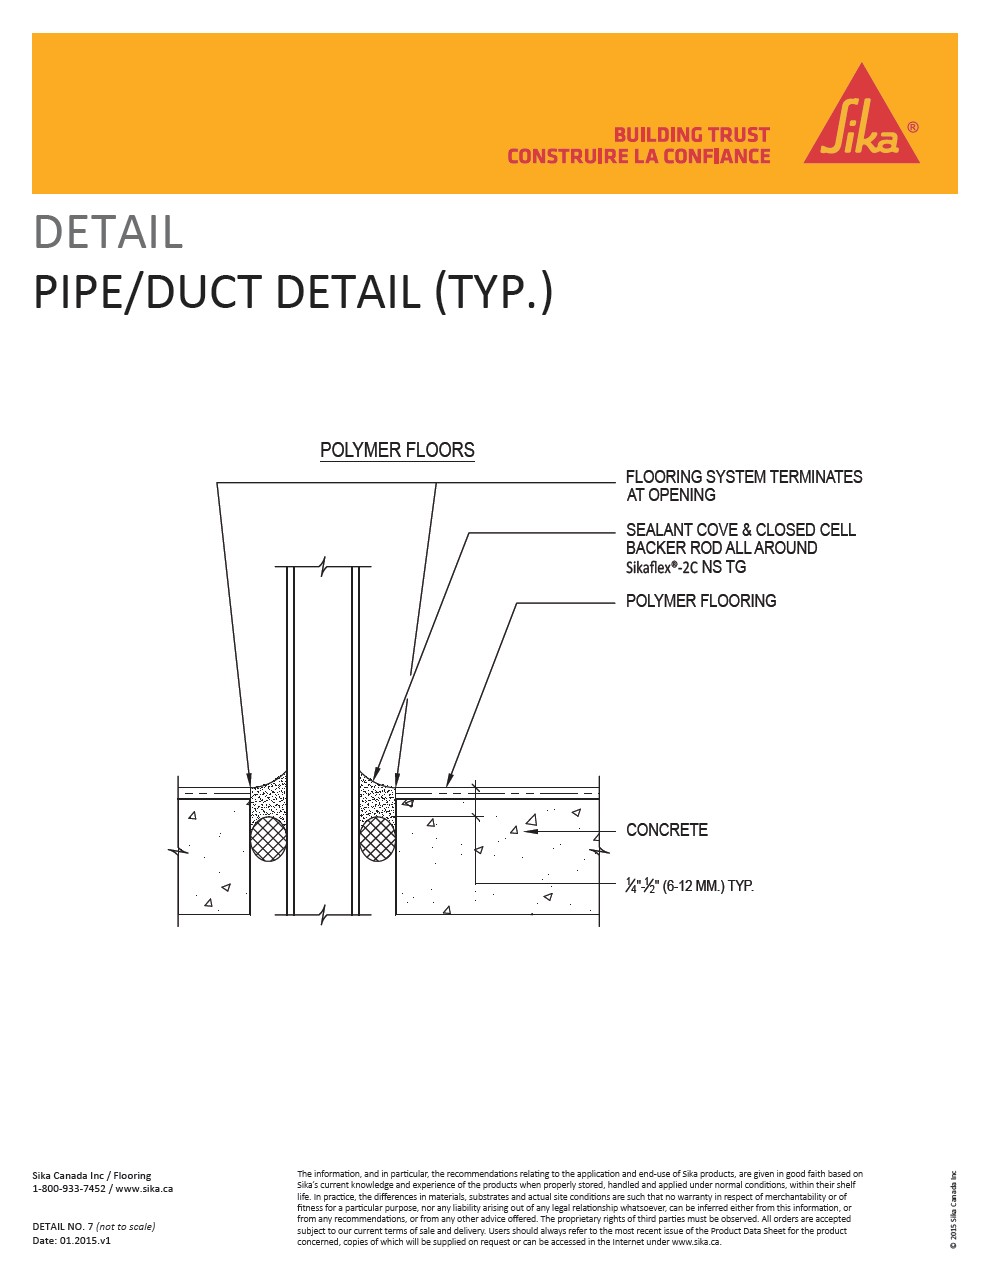 7-Pipe-Duct 